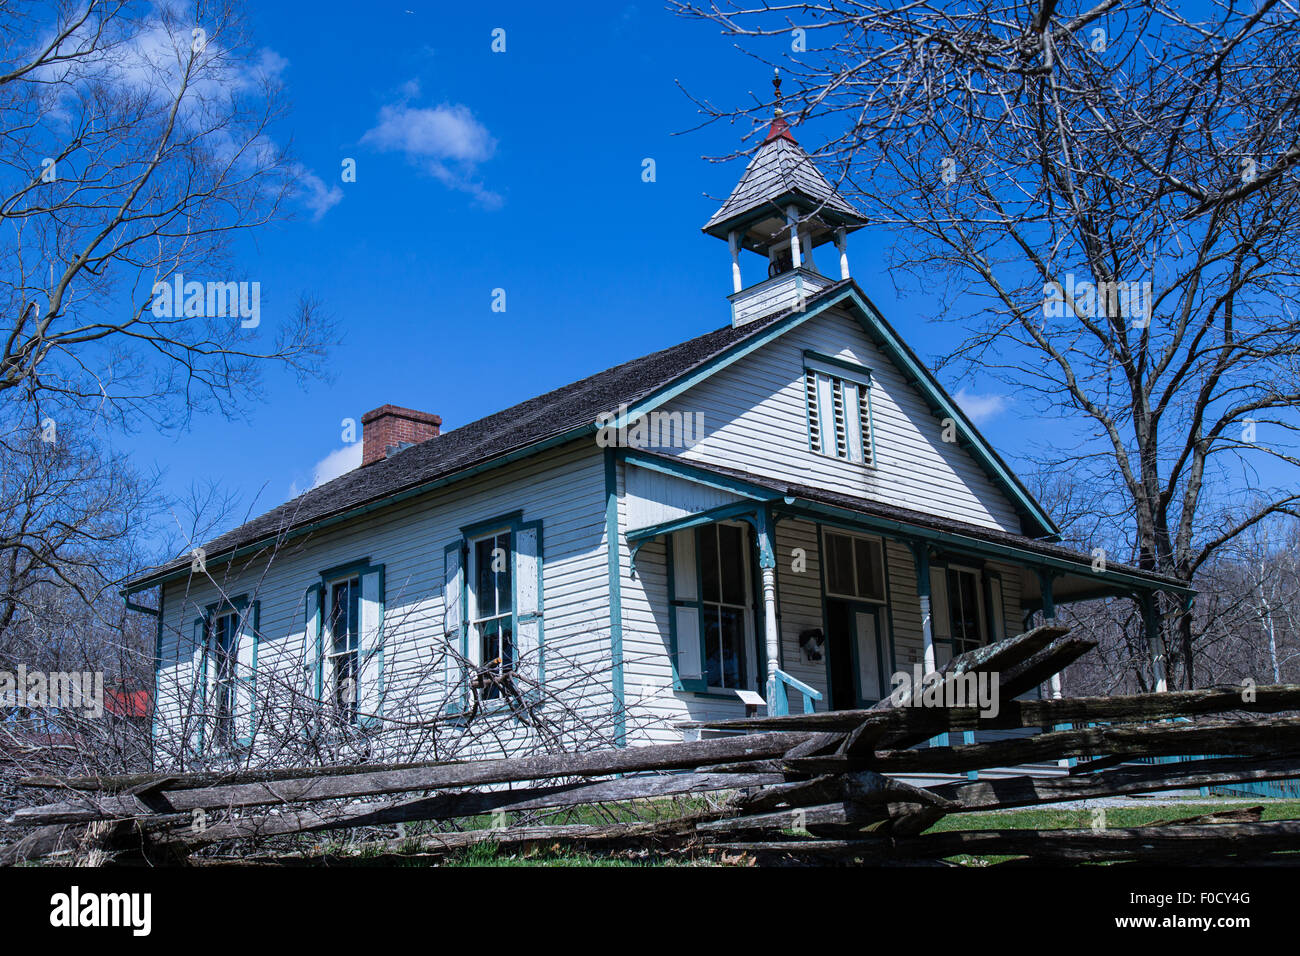 A one-room schoolhouse at the Landis Valley Farm museum, located in Lancaster County, PA, includes a historical collection and d Stock Photo